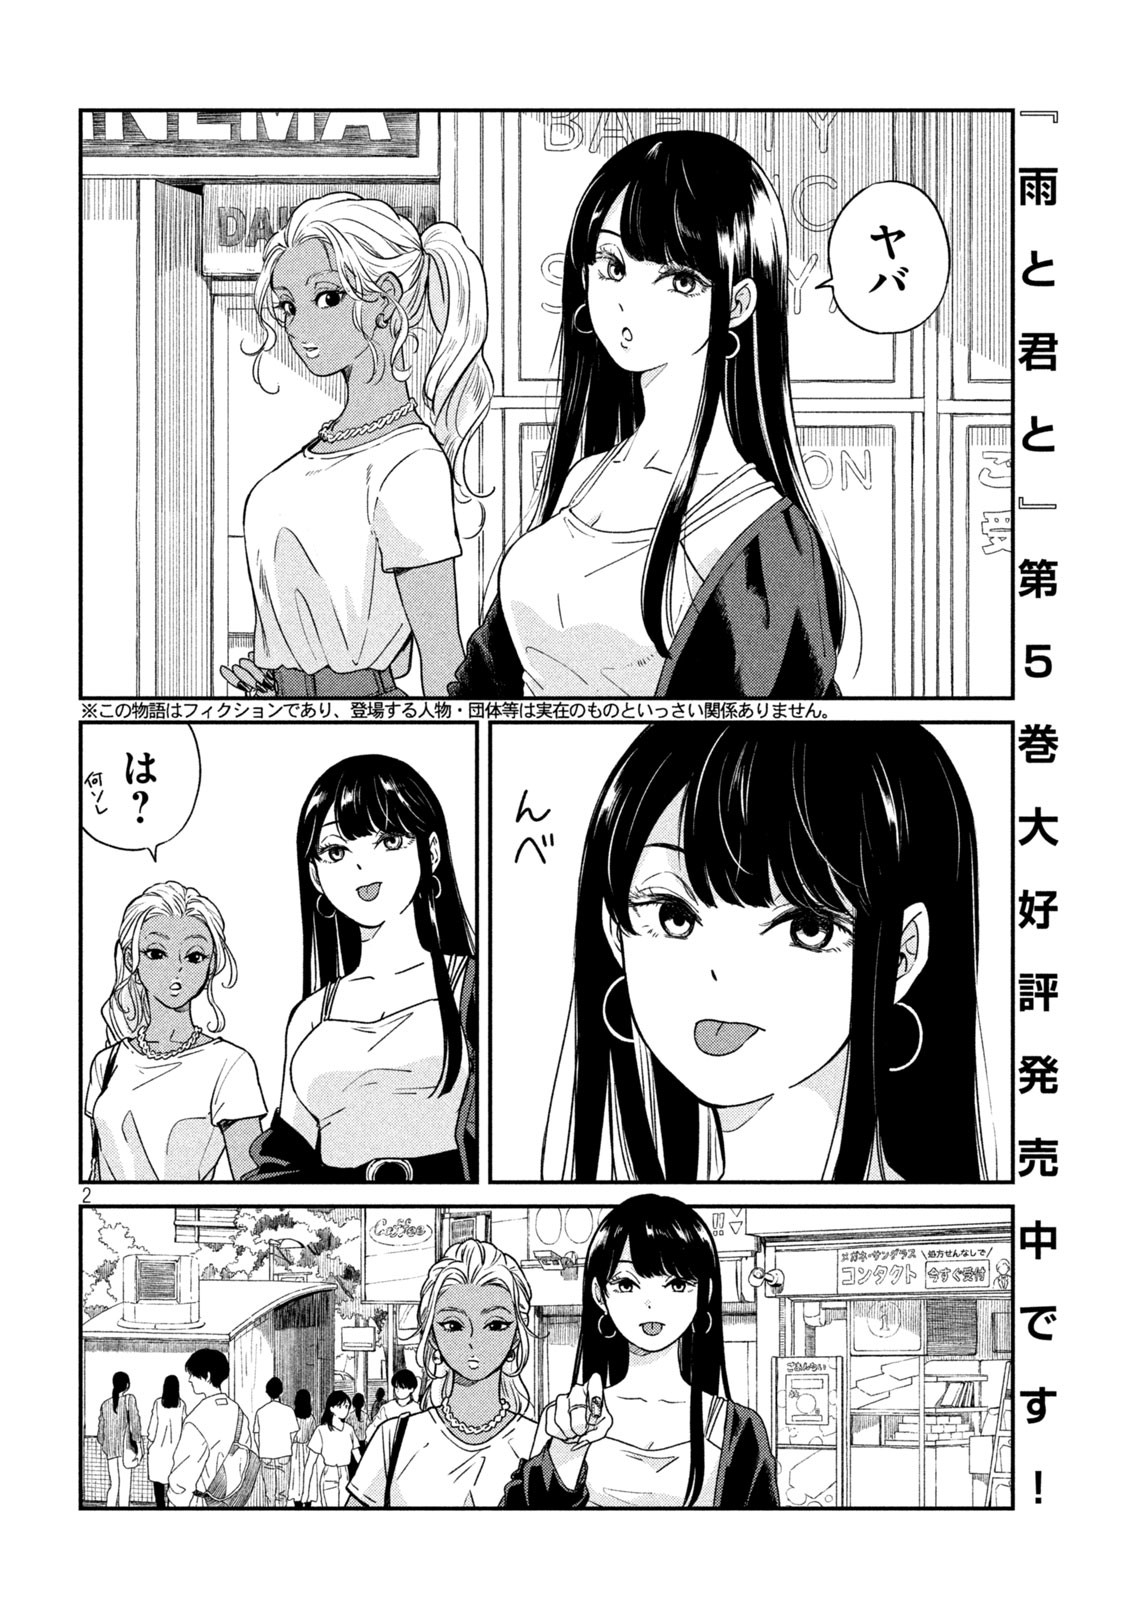 Ame to Kimi to - Chapter 94 - Page 2